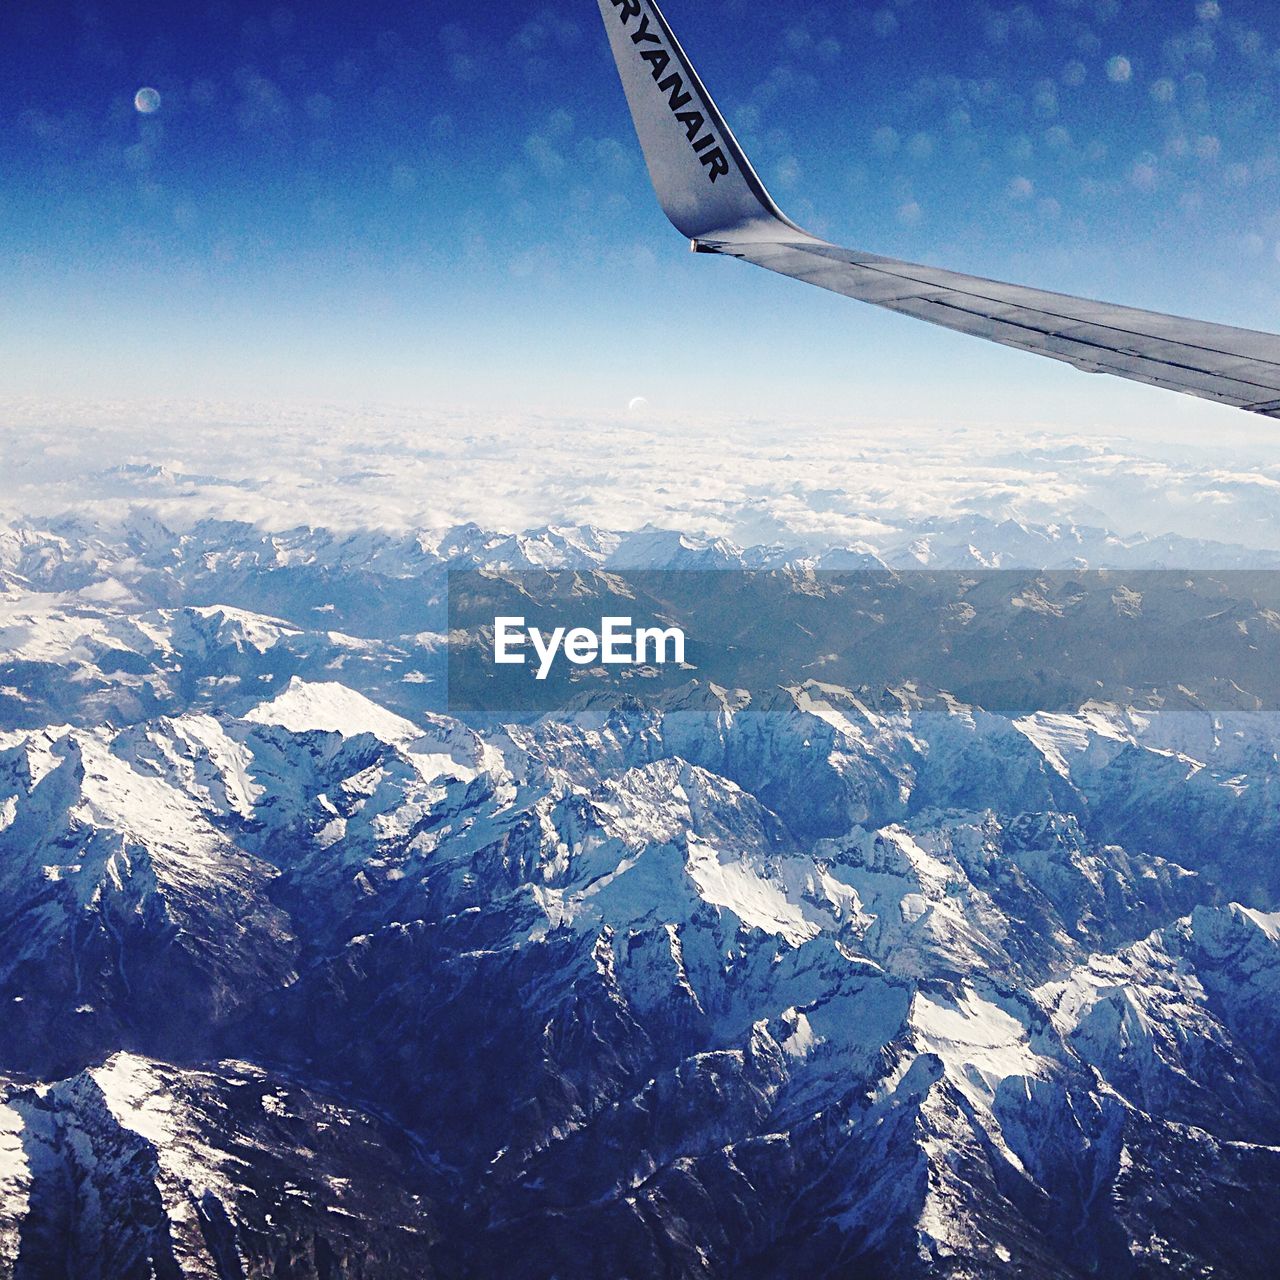 Cropped image of airplane over snowcapped mountains